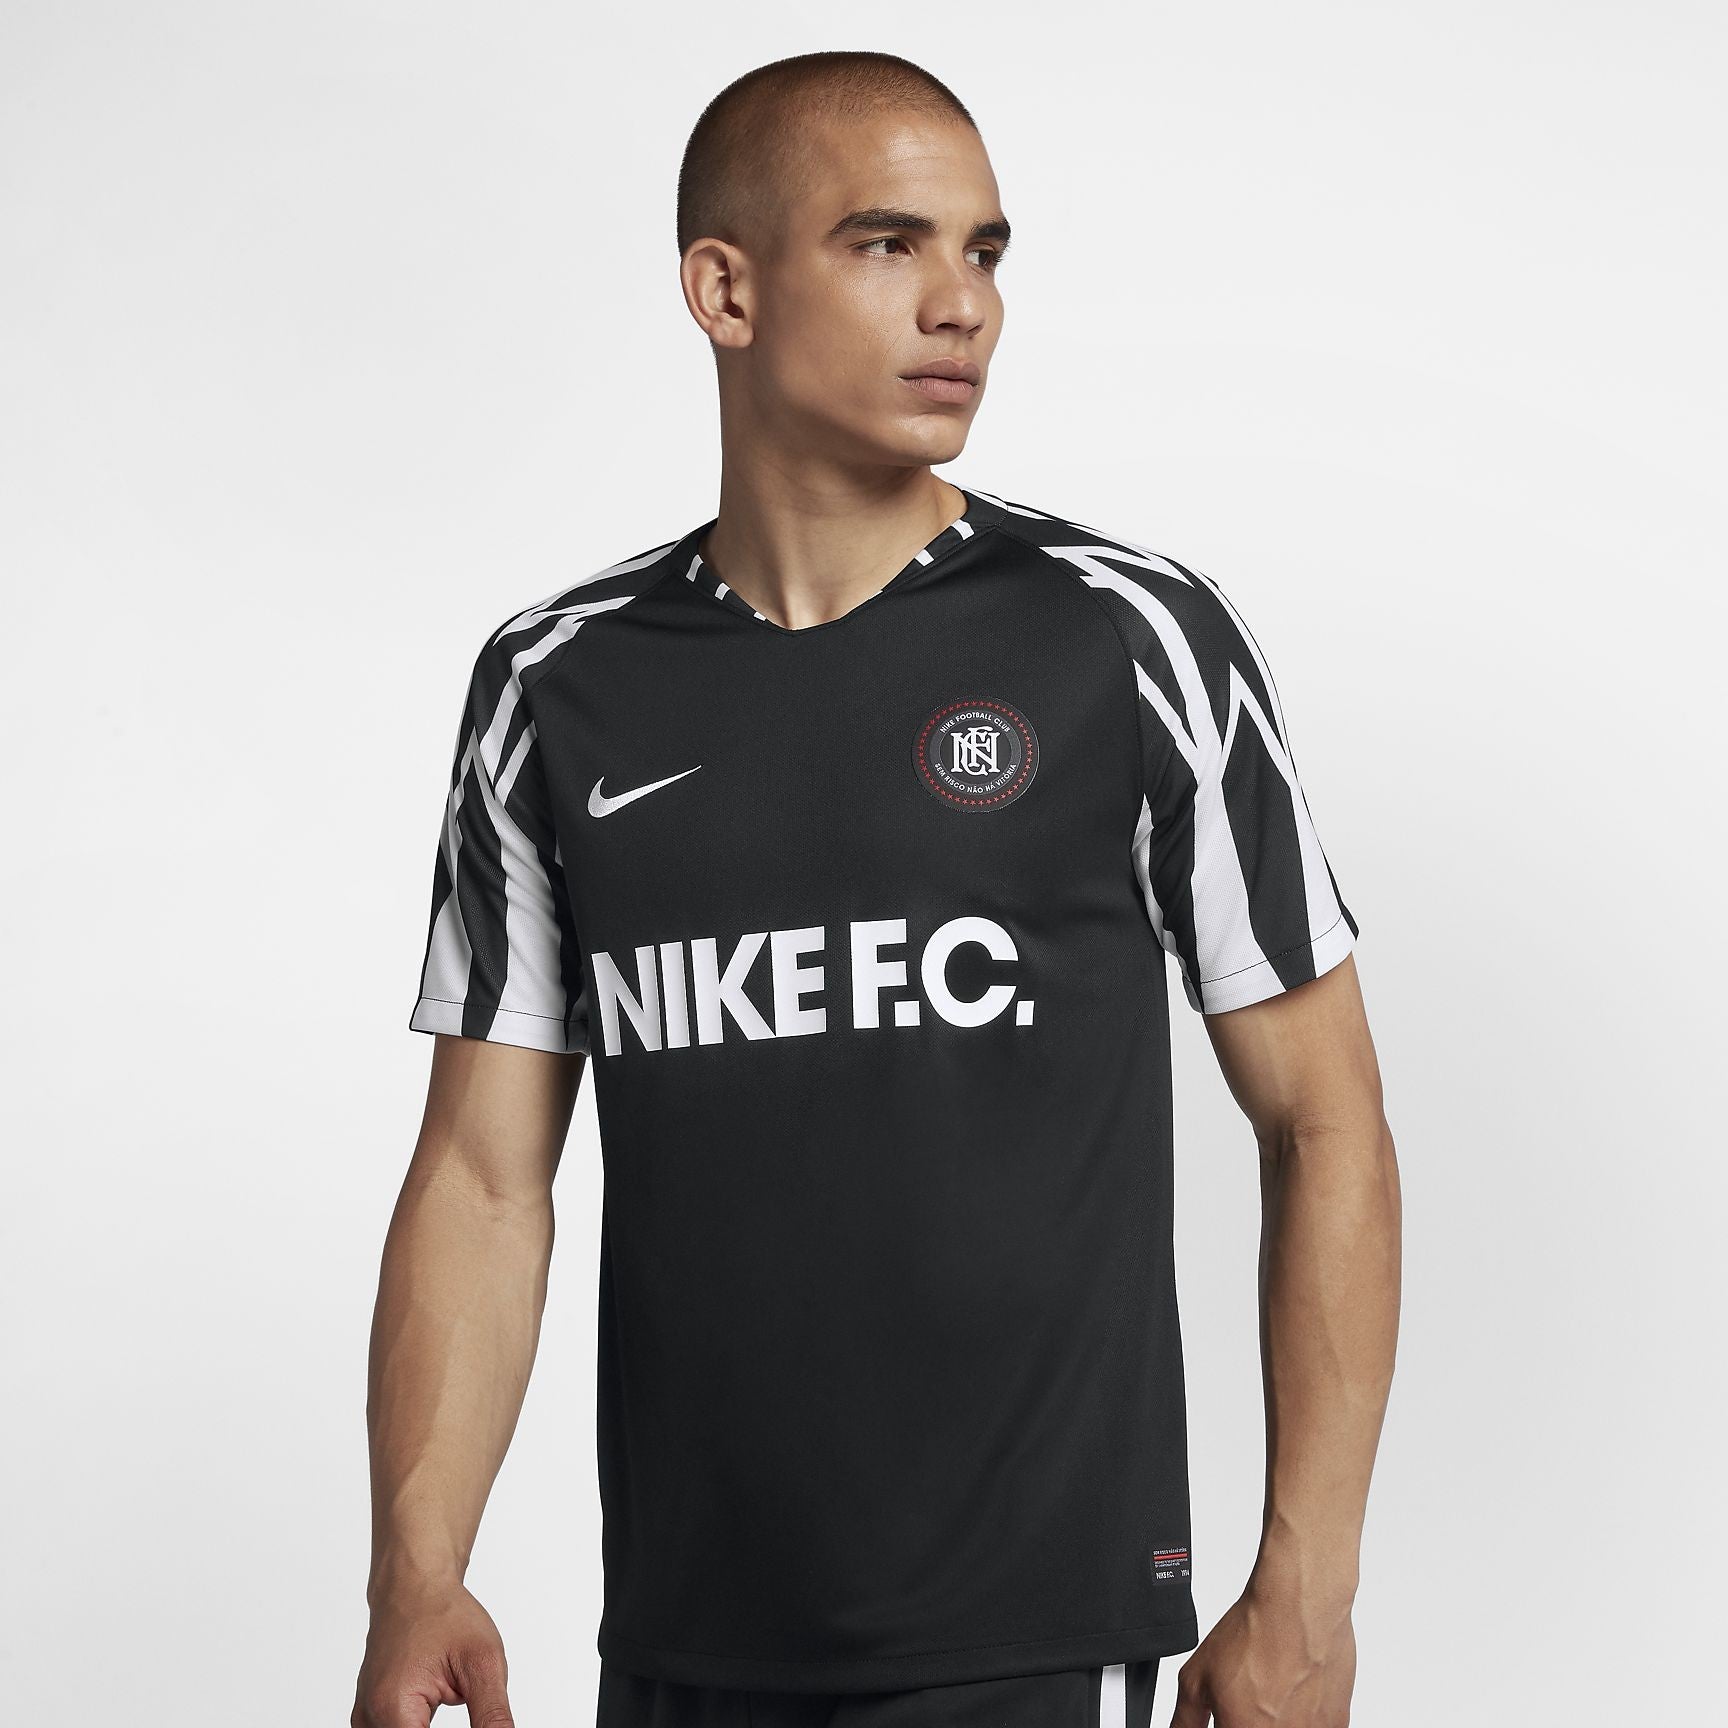 nike fc home jersey